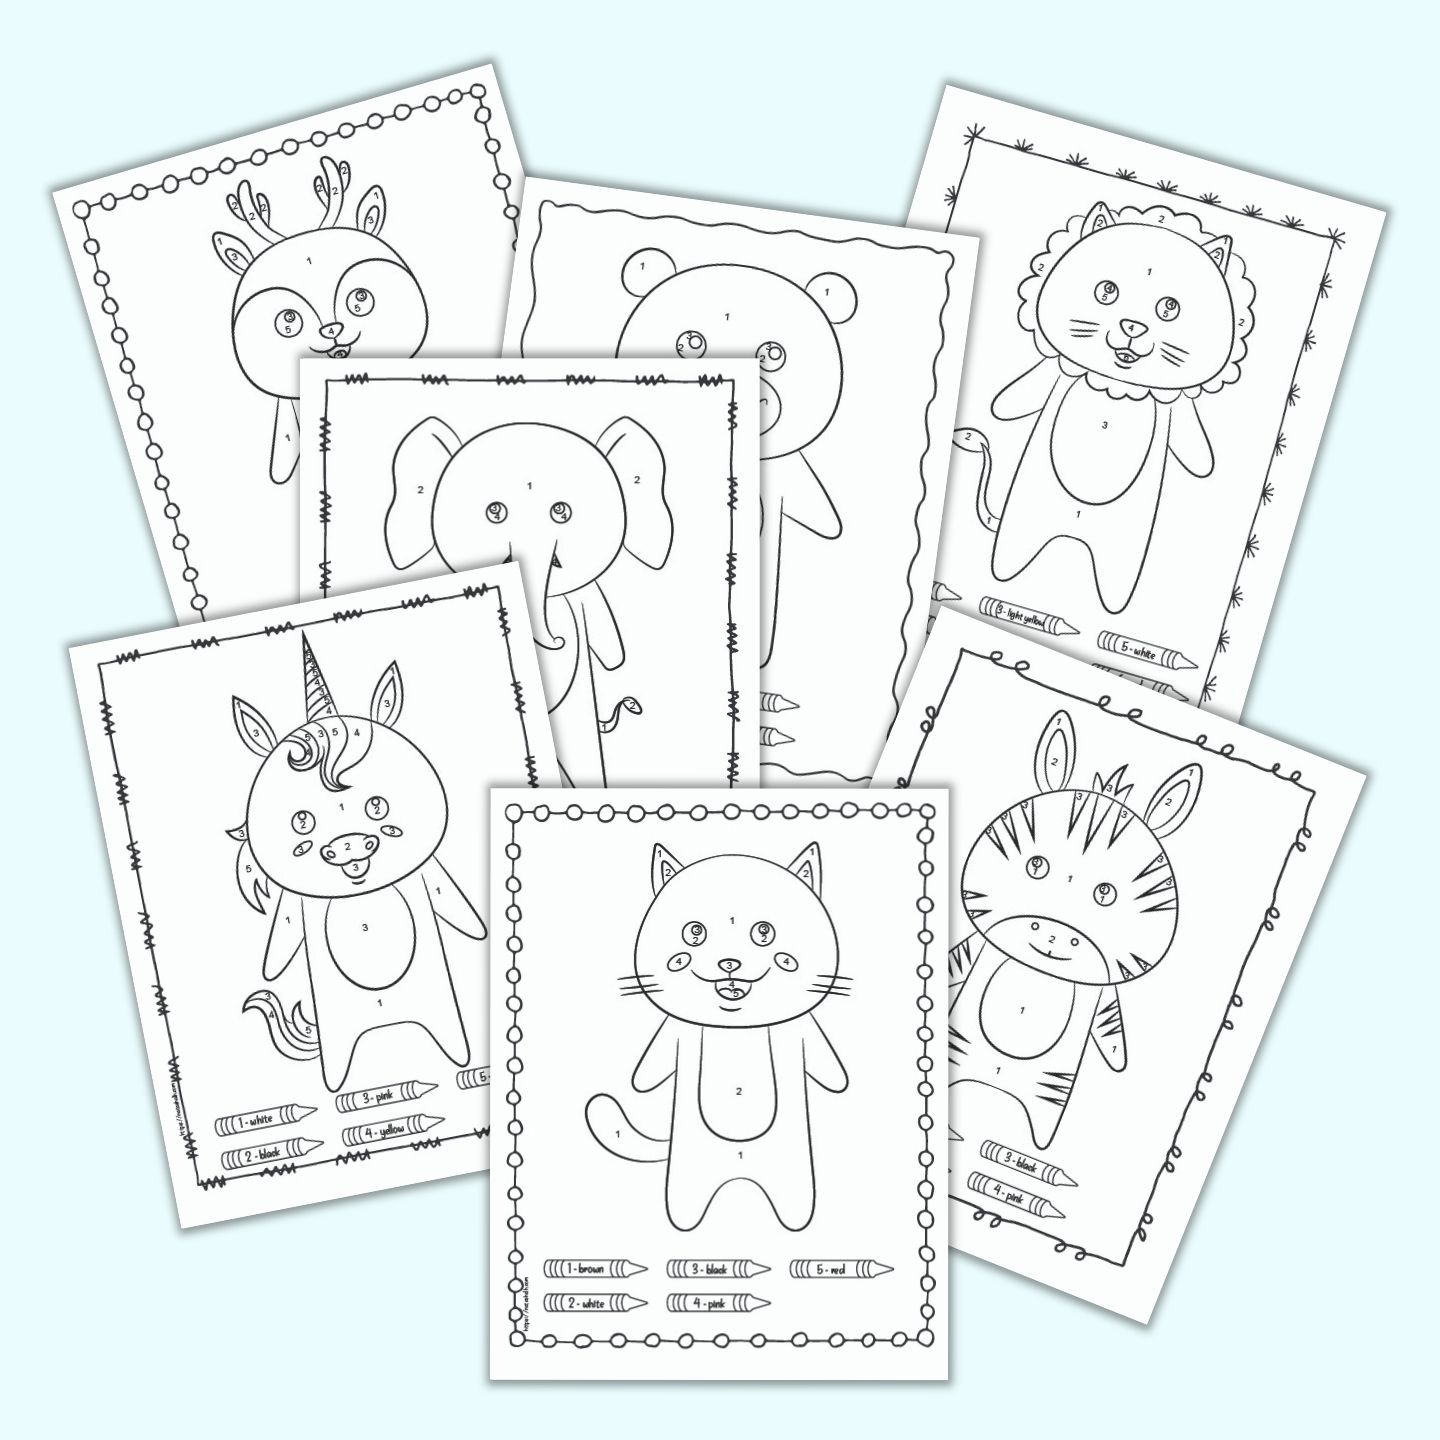 15 free printable easy animal color by number pages the artisan life